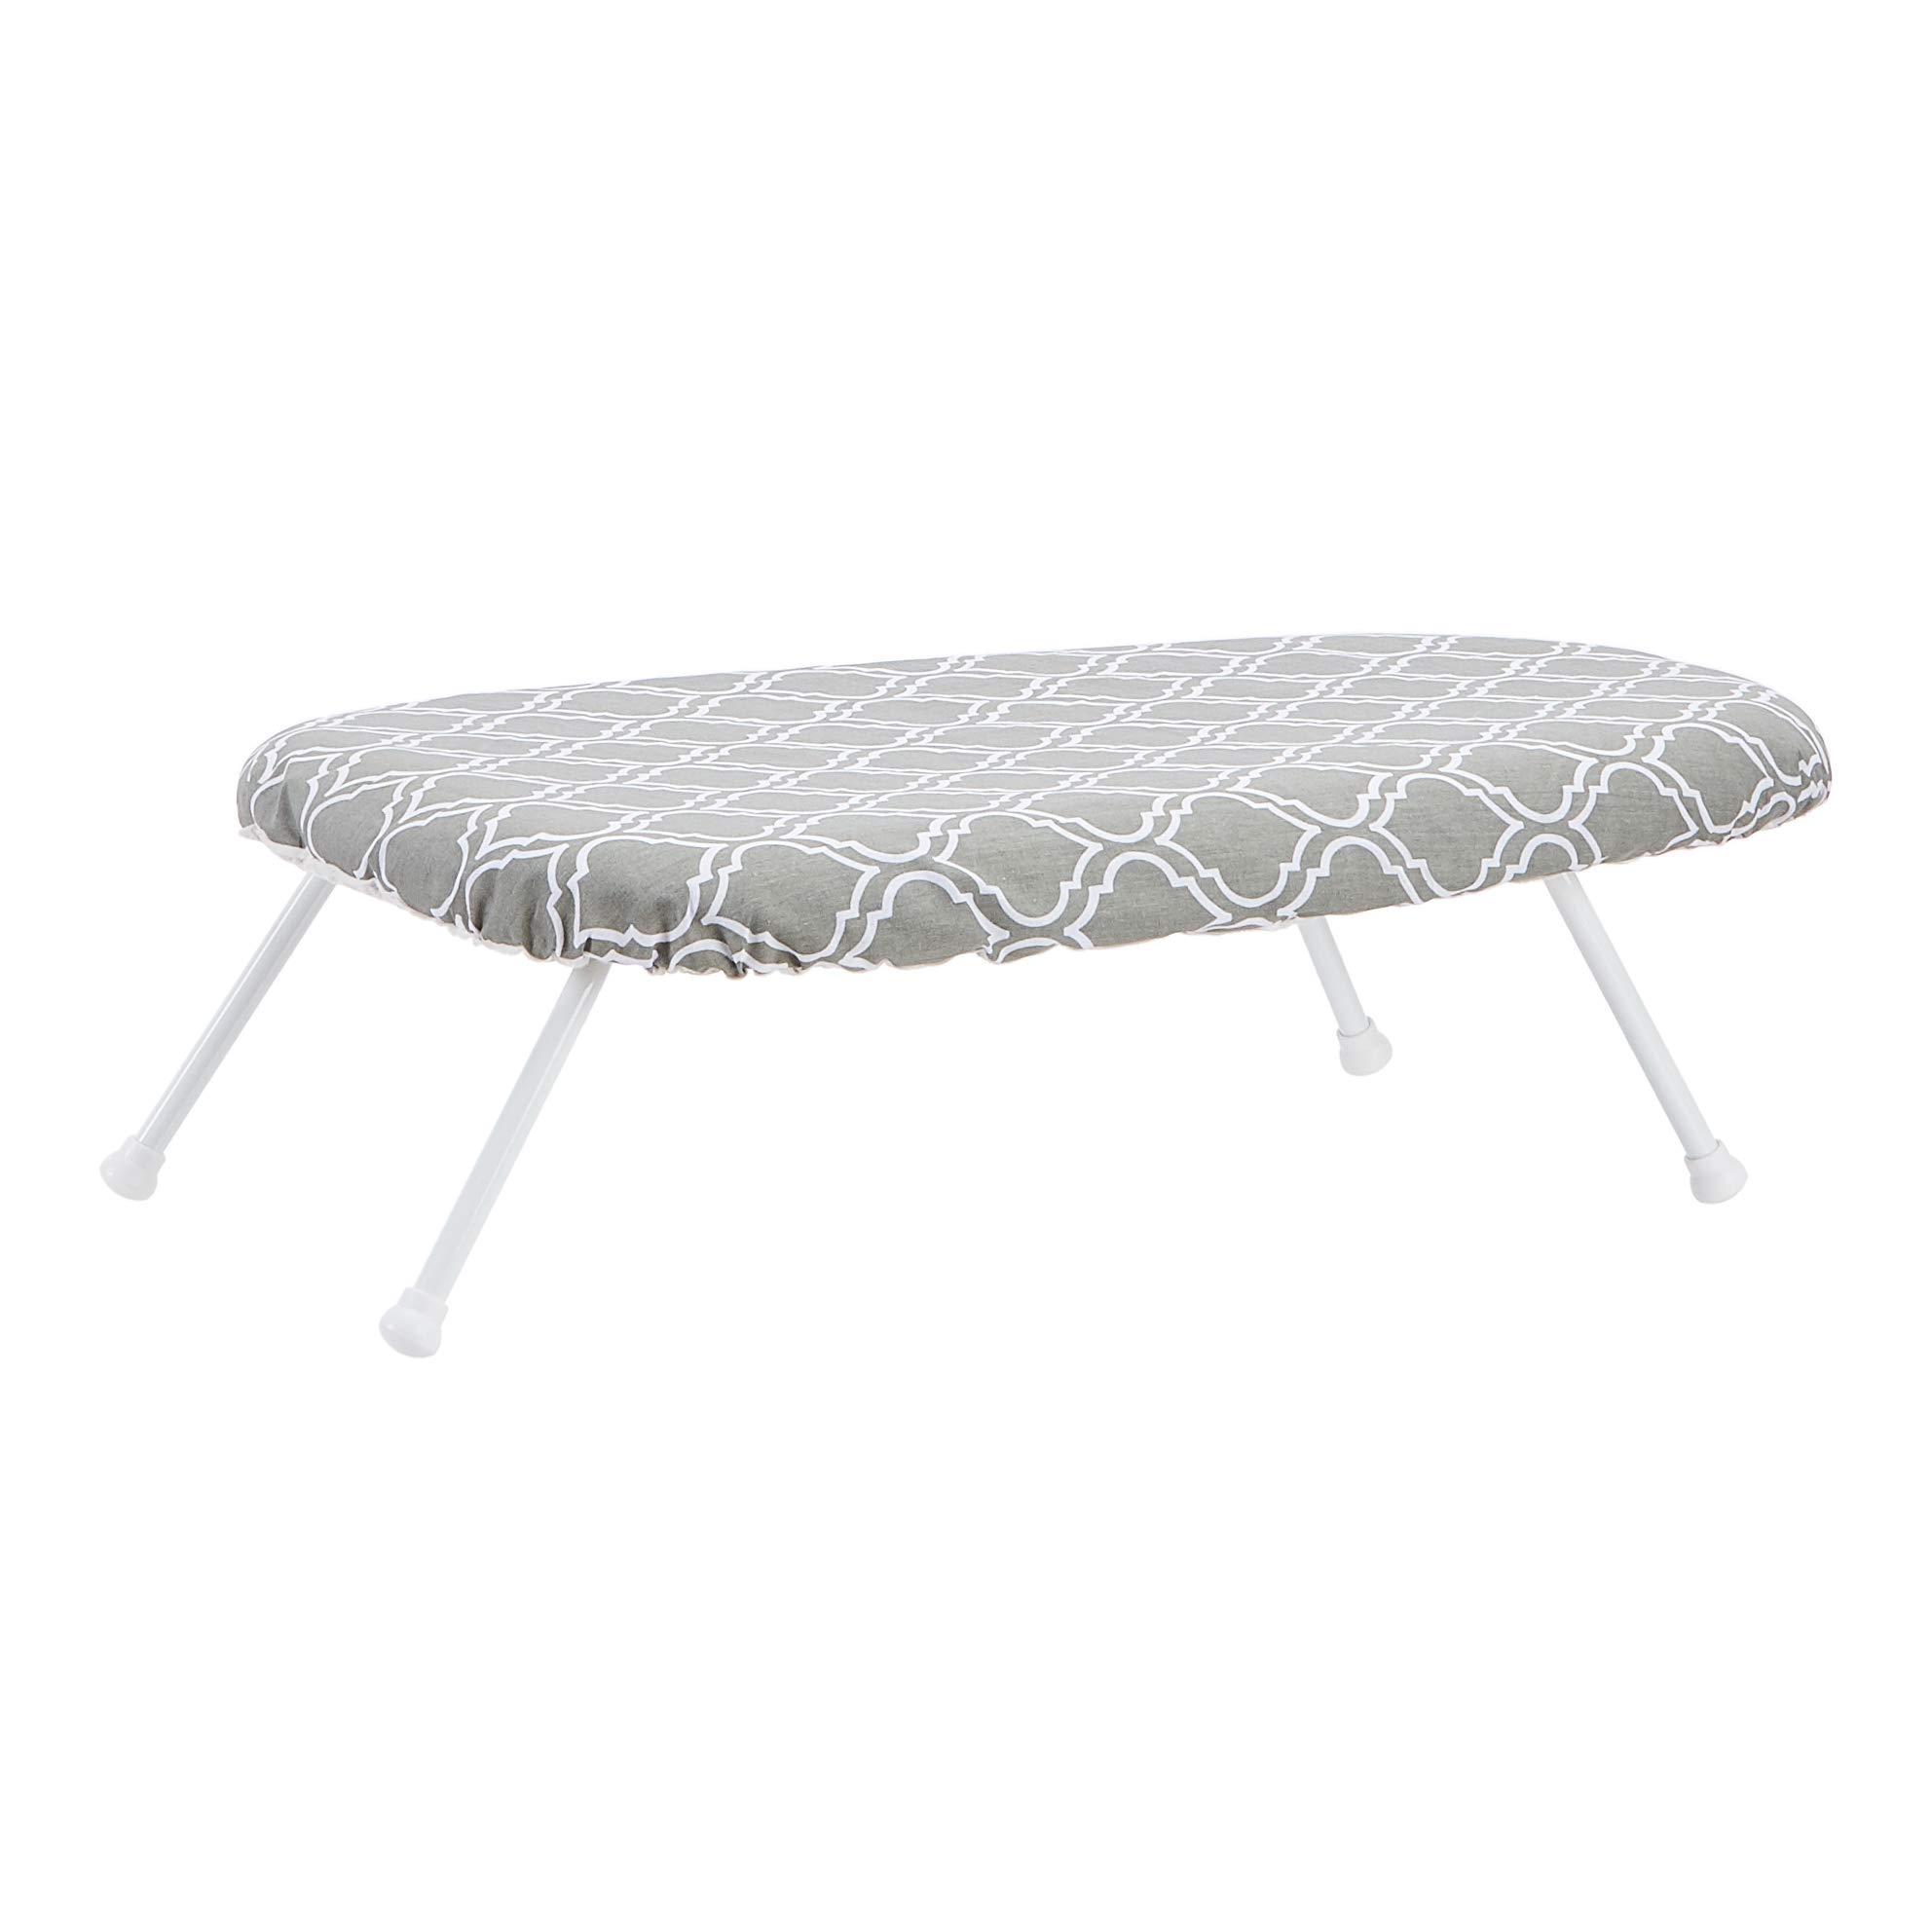 Amazon Basics Tabletop Ironing Board with Folding Legs - Trellis Removable Cover